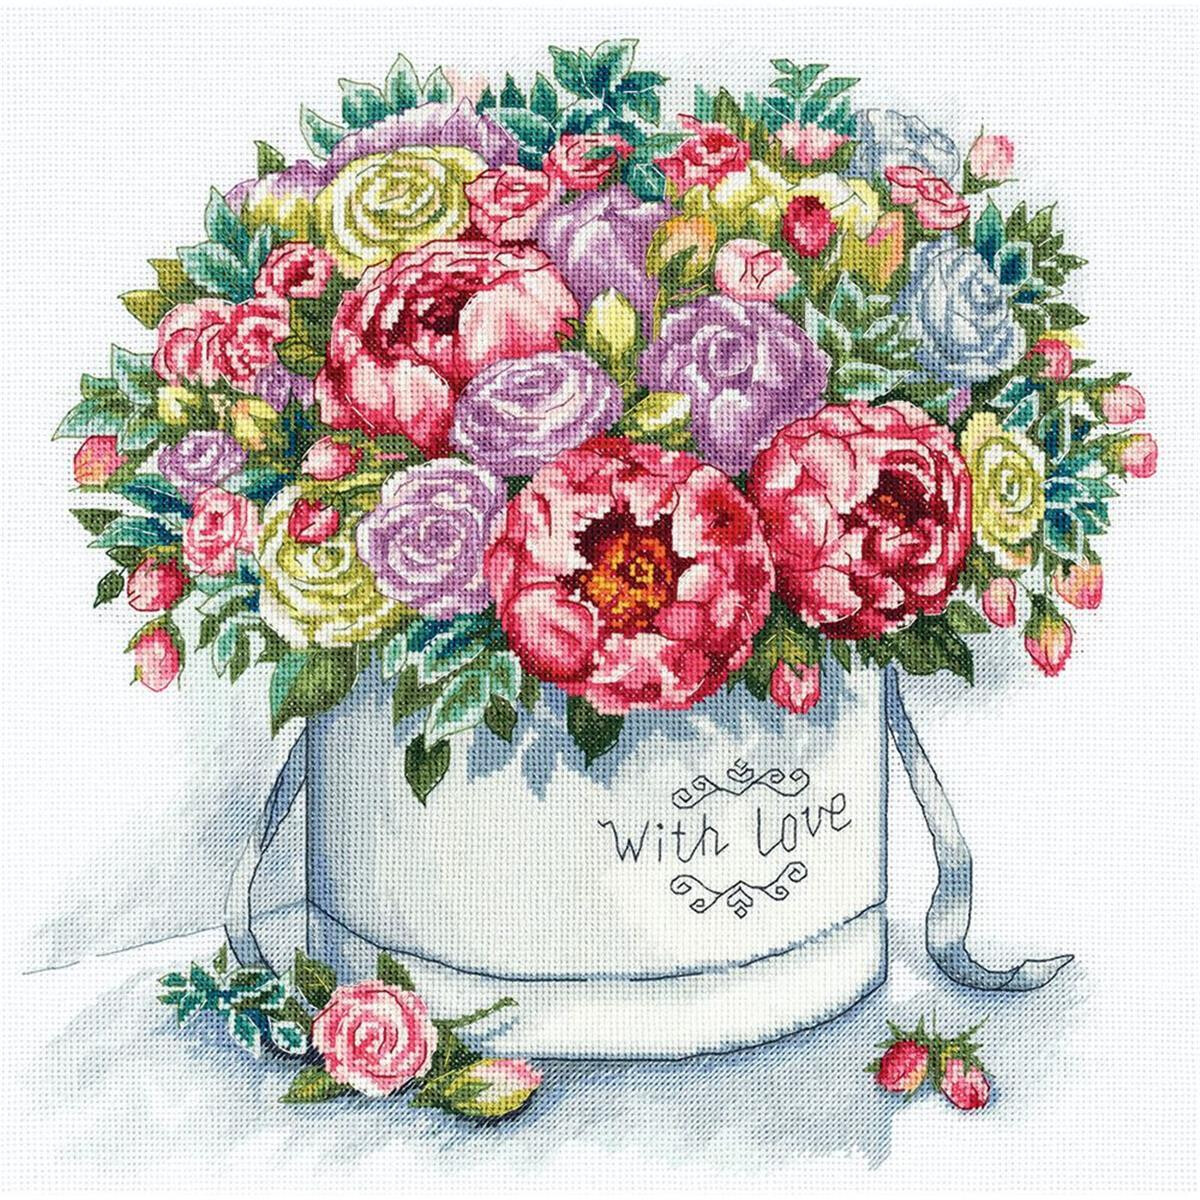 Panna counted cross stitch kit "Peonies in a Hat...